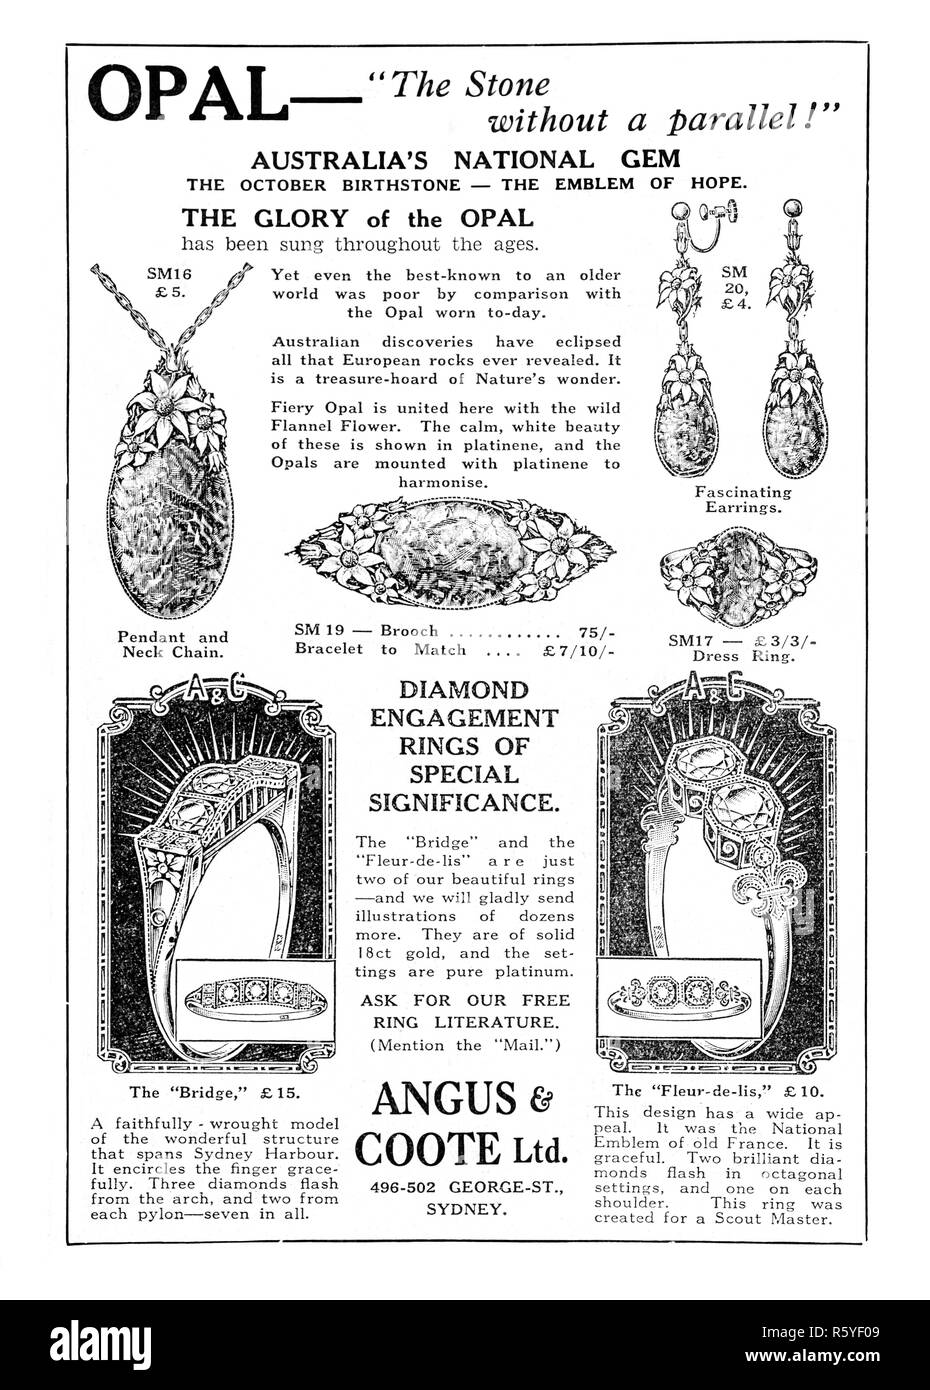 A 1932 Australian newspaper advertisement for opal jewellery by Angus & Coote Ltd. Stock Photo